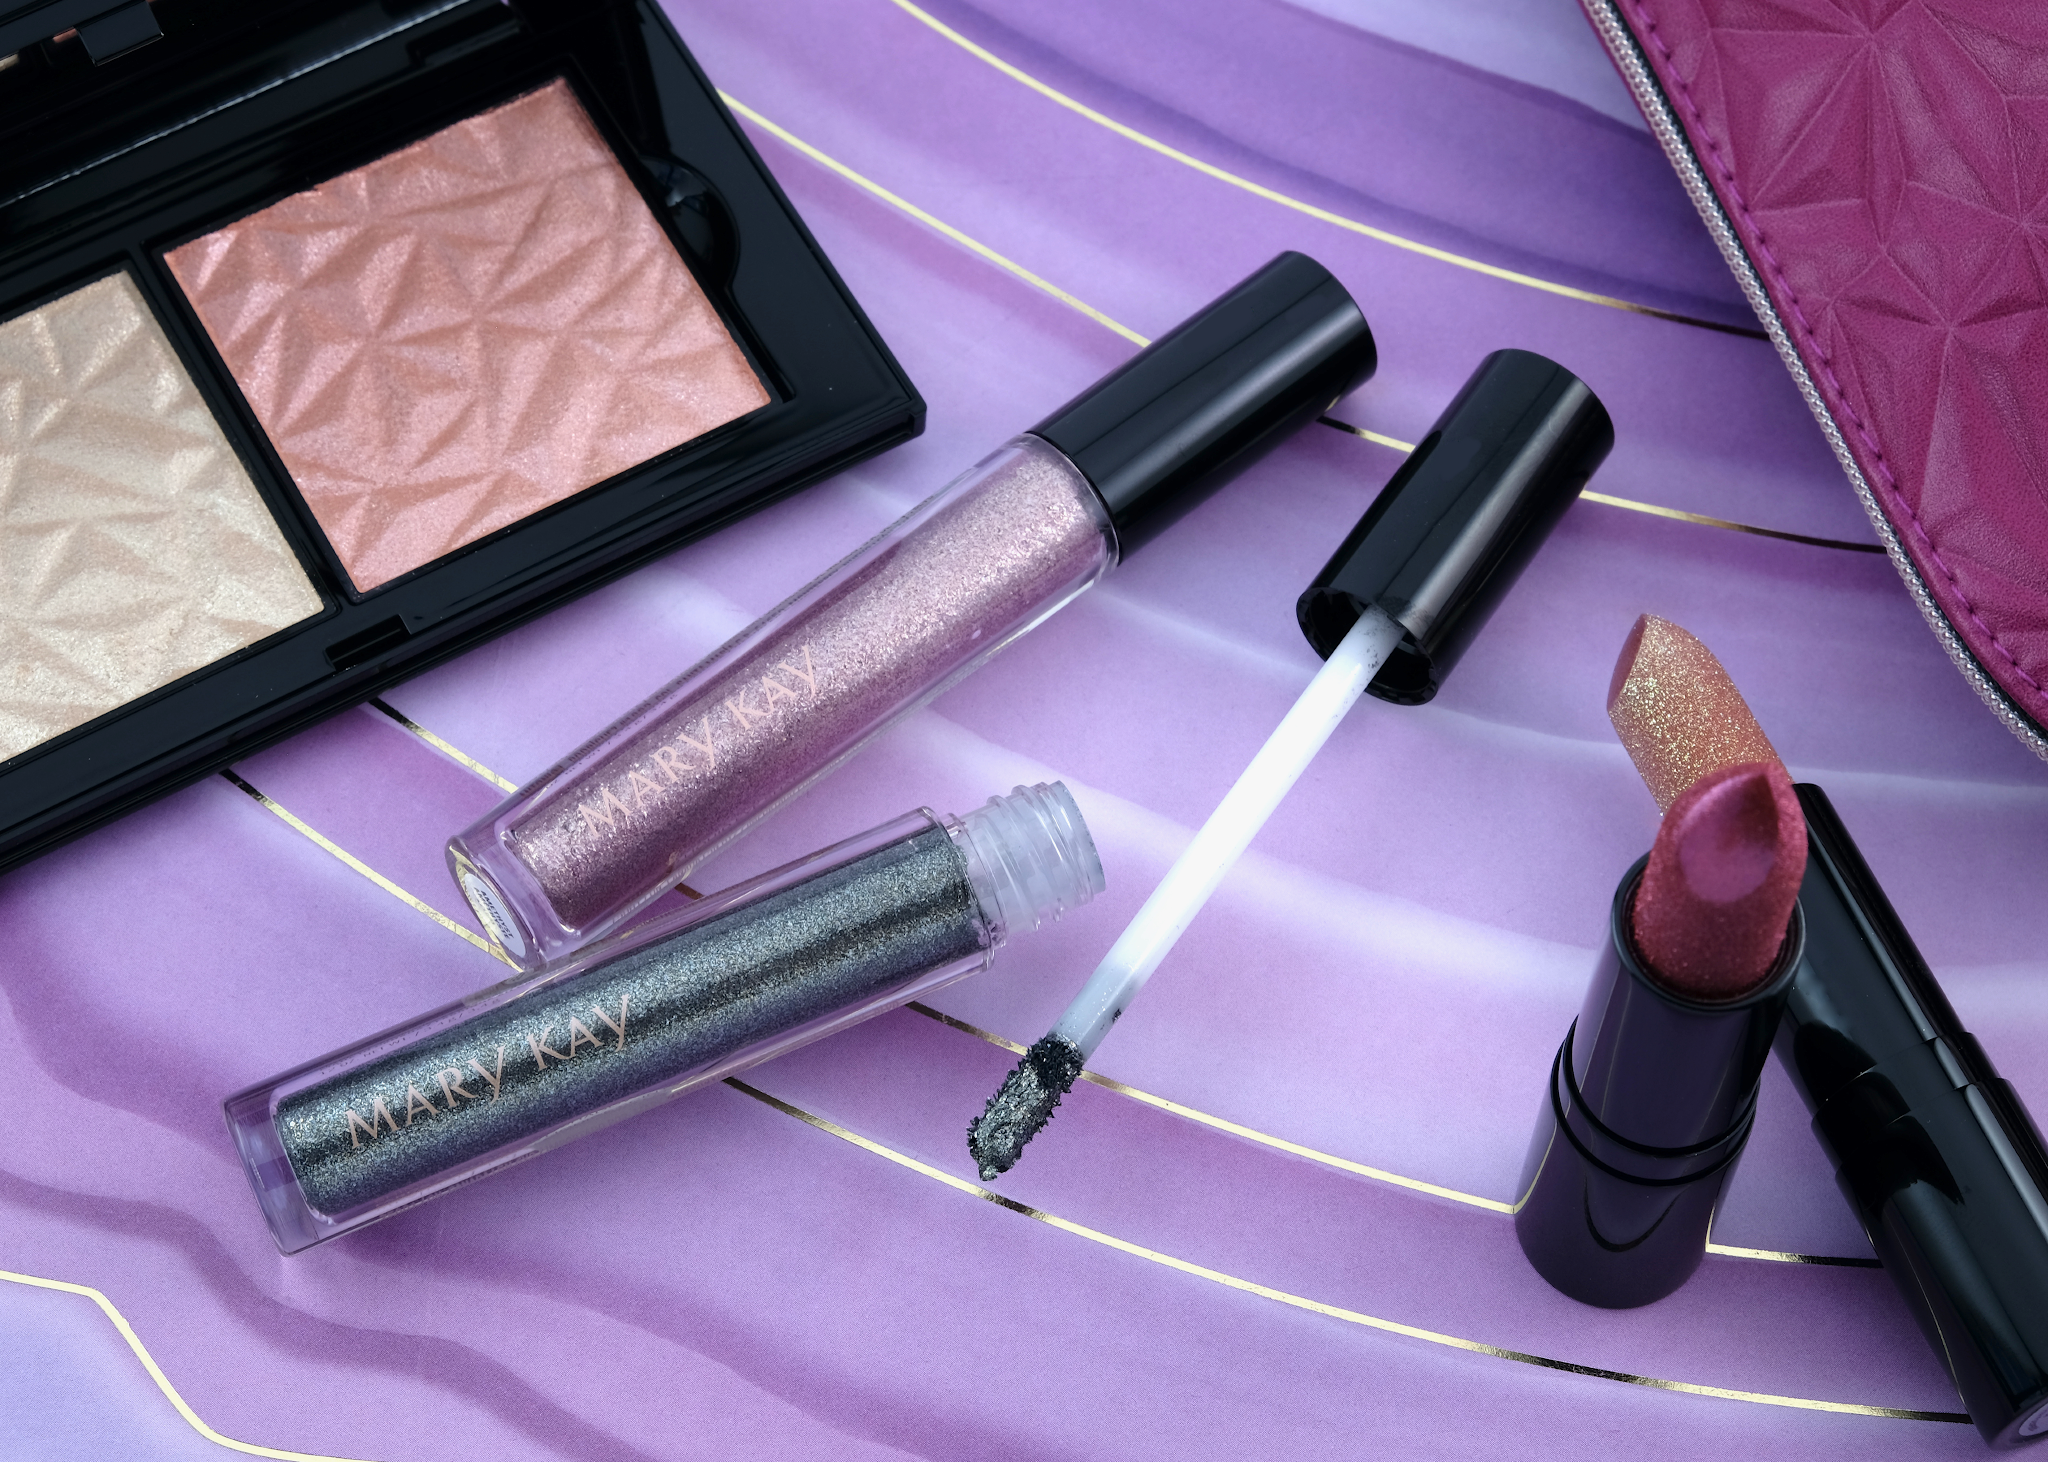 Mary Kay Fall 2021 | Shimmer Liquid Eyeshadow in "Amethyst" & Graphite": Review and Swatches